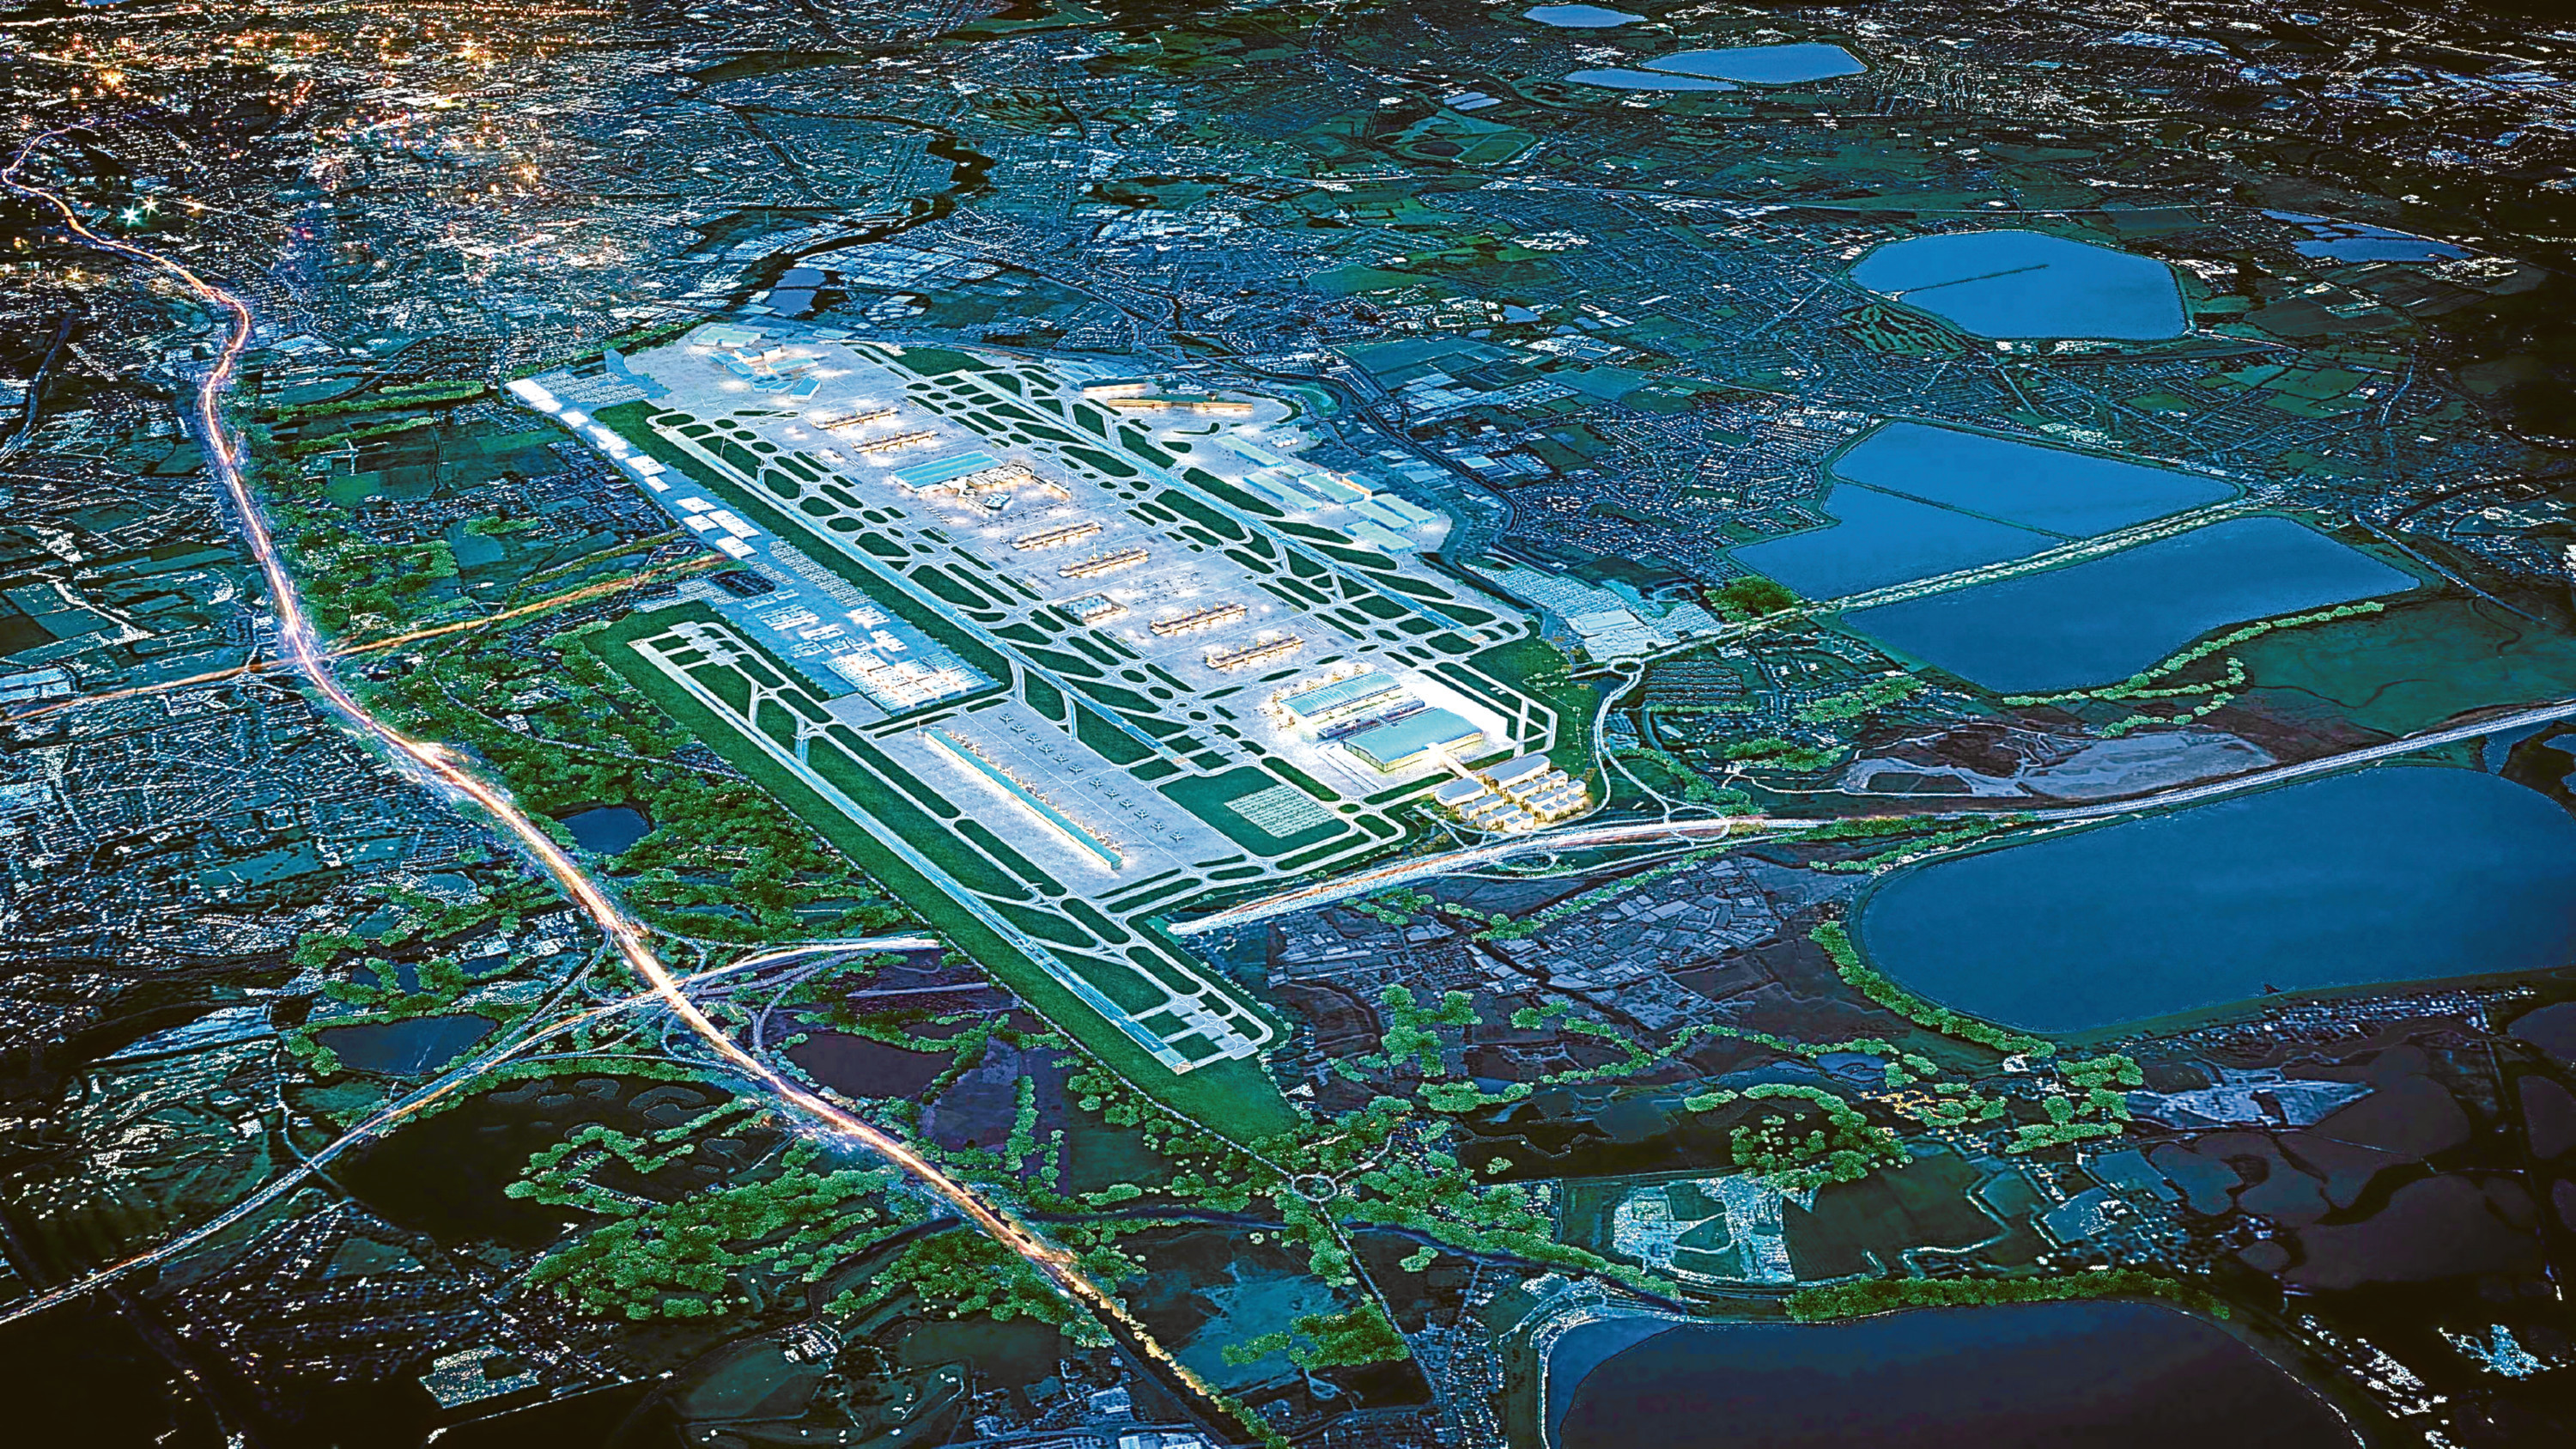 An artist's impression of the proposed Heathrow expansion.